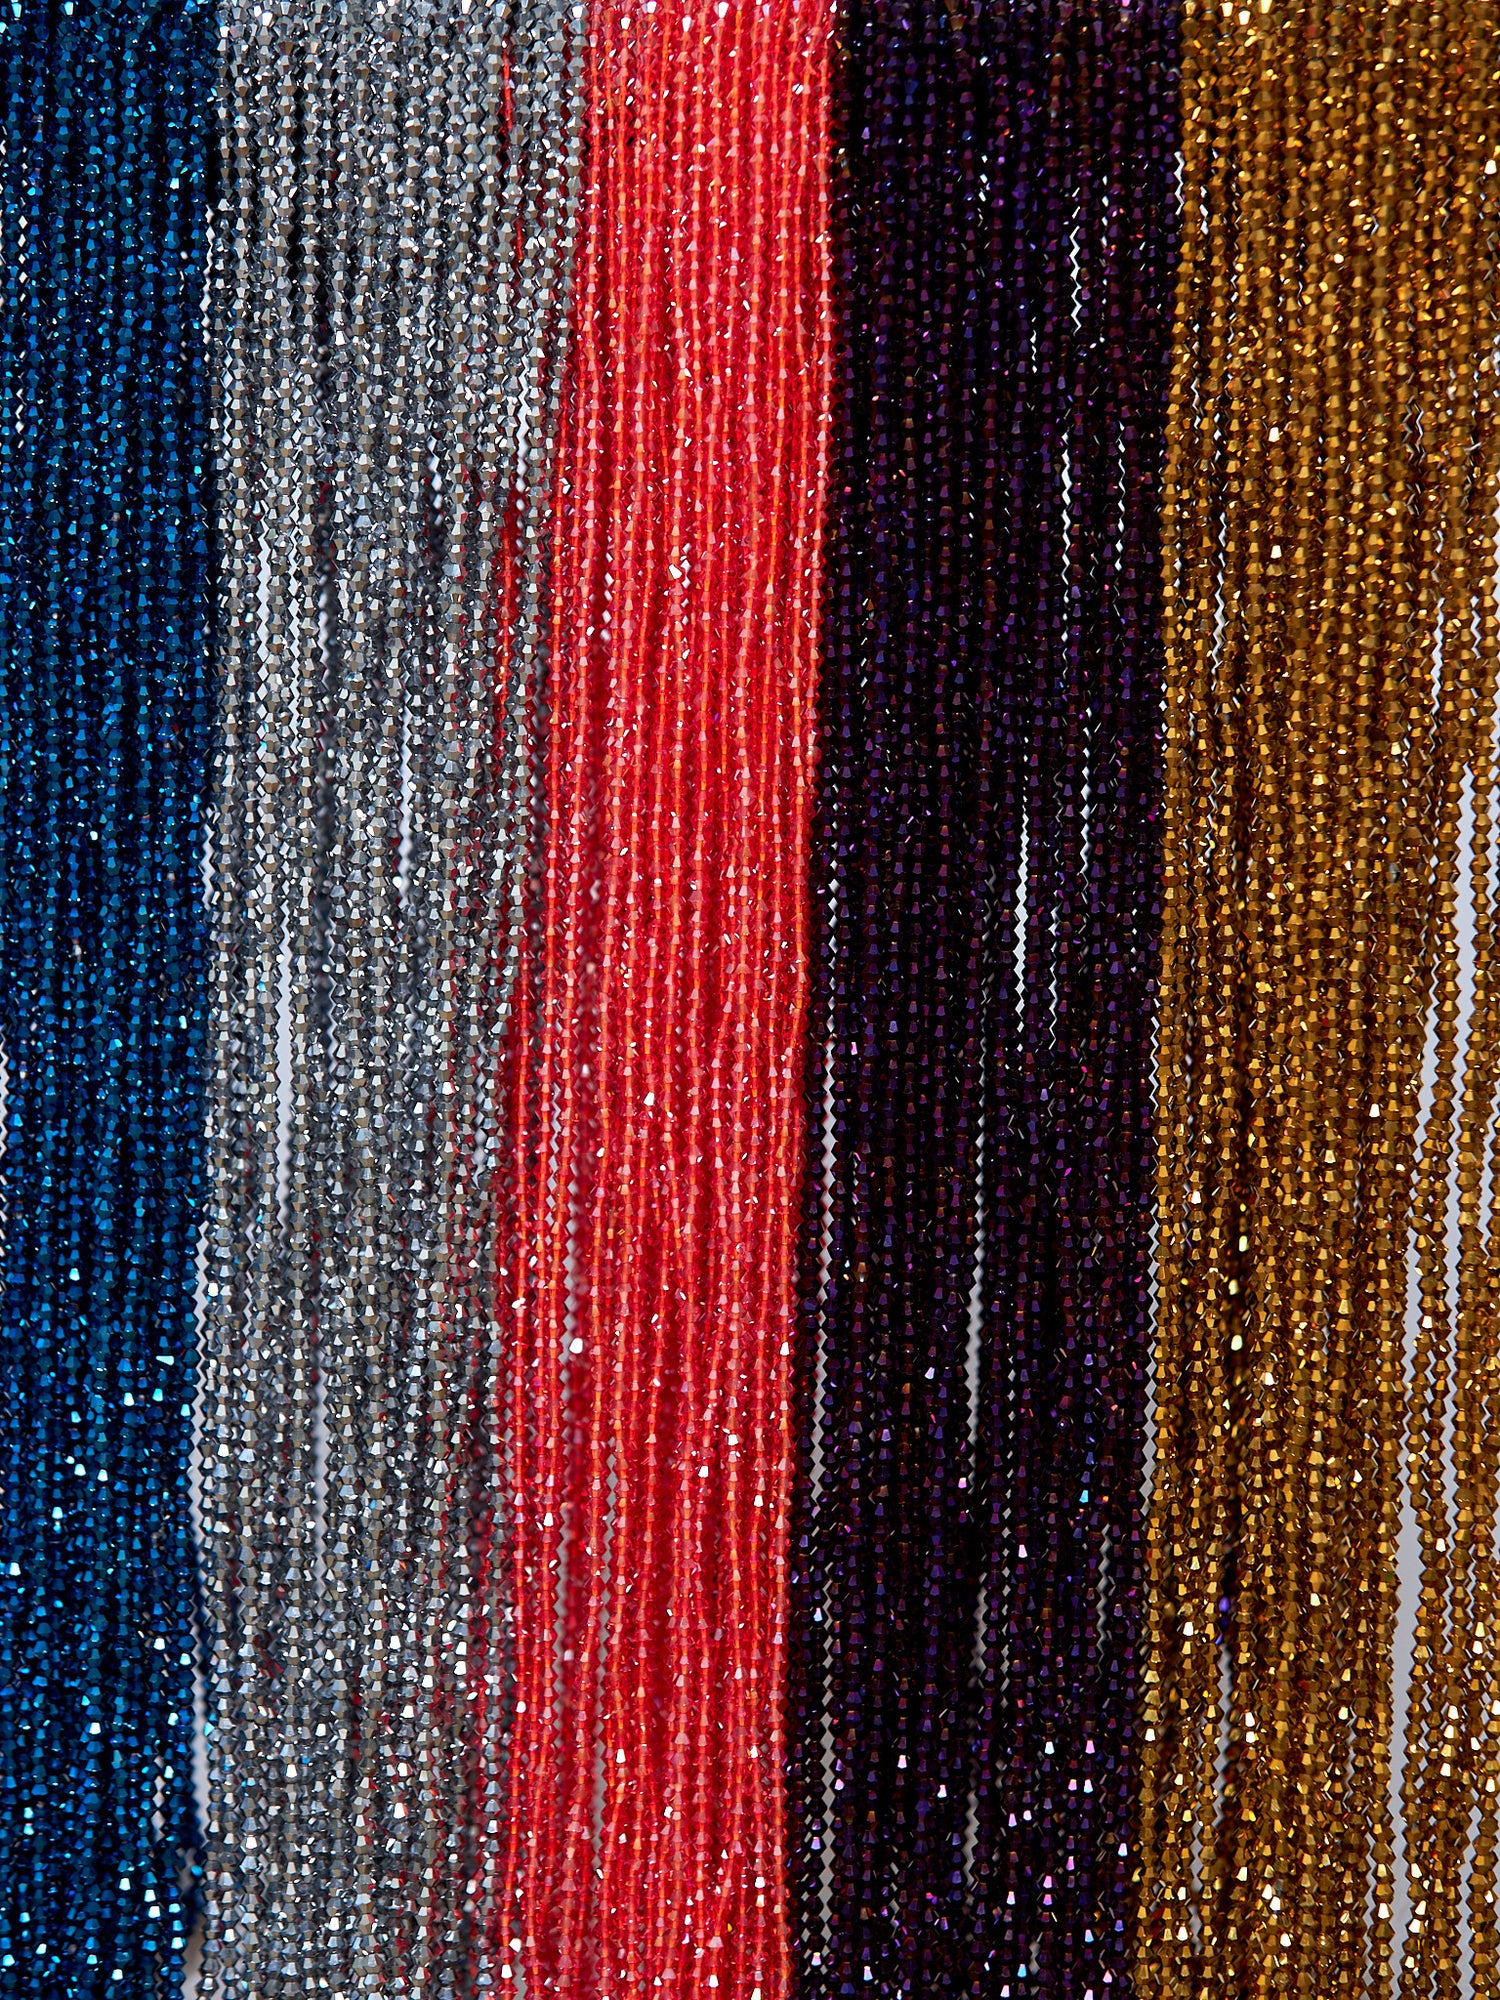 5 different types of waist beads including 52 Inches Orange Shiny Crystal Tie On Waist beads, 53 Inches Purple black Shiny Crystal Tie On Waist beads, 52 Inches Gold Shiny Crystal Tie On Waist beads, 53 Inches Silver Shiny Crystal Tie On Waist beads, And 52 Inches Blue Shiny Crystal Tie On Waist beads.